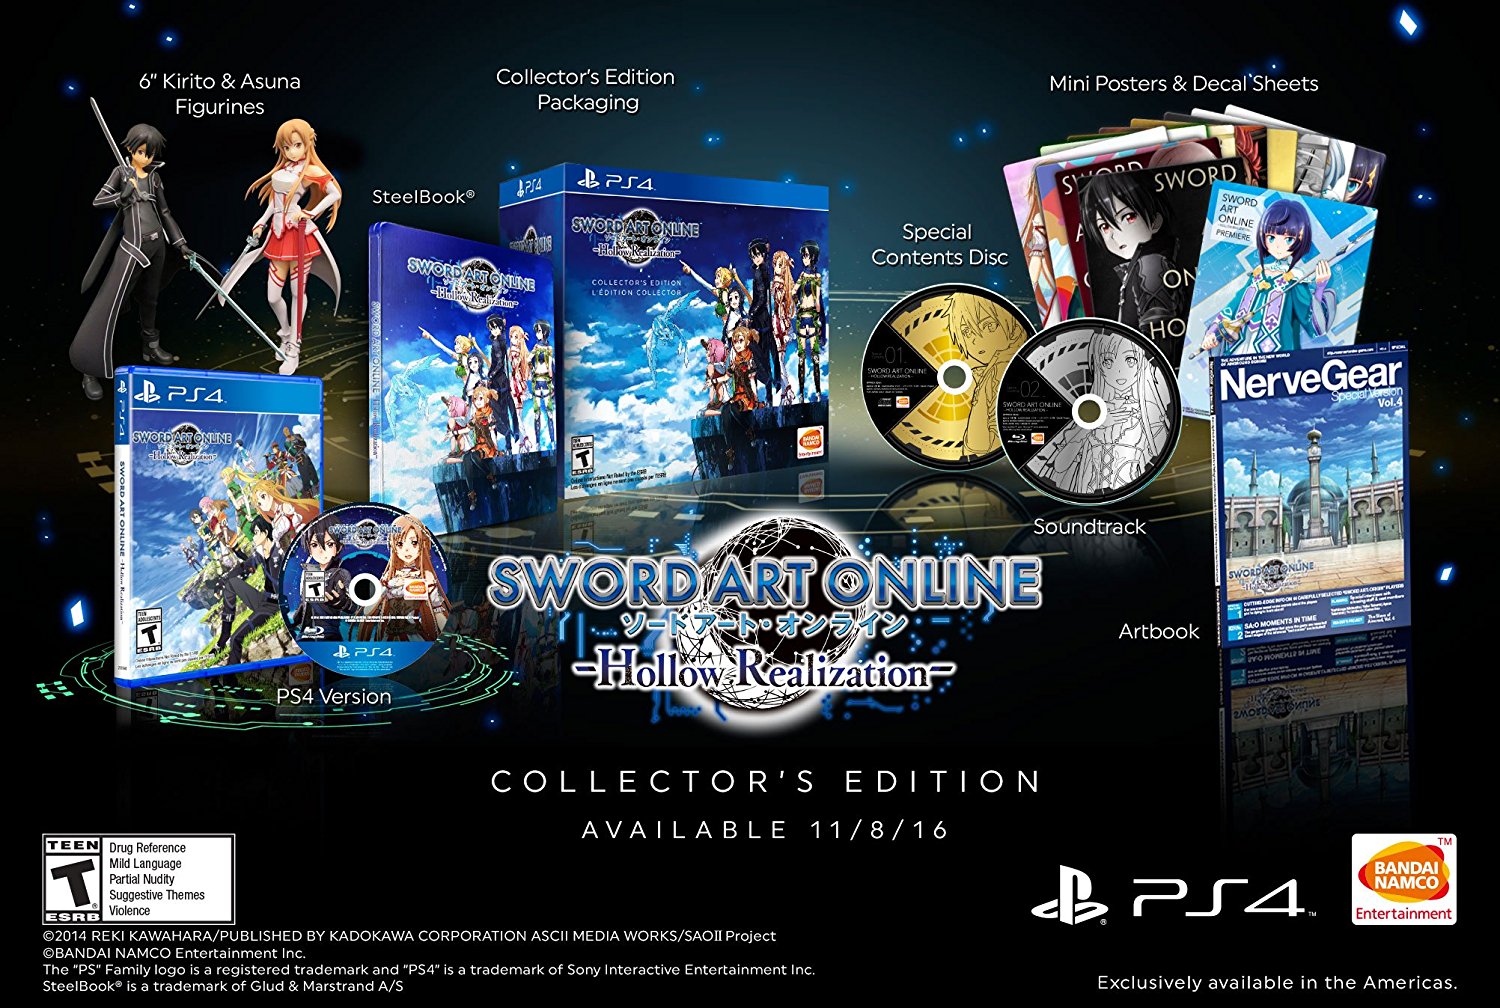 Sword Art Online Hollow Realization Collector's Edition